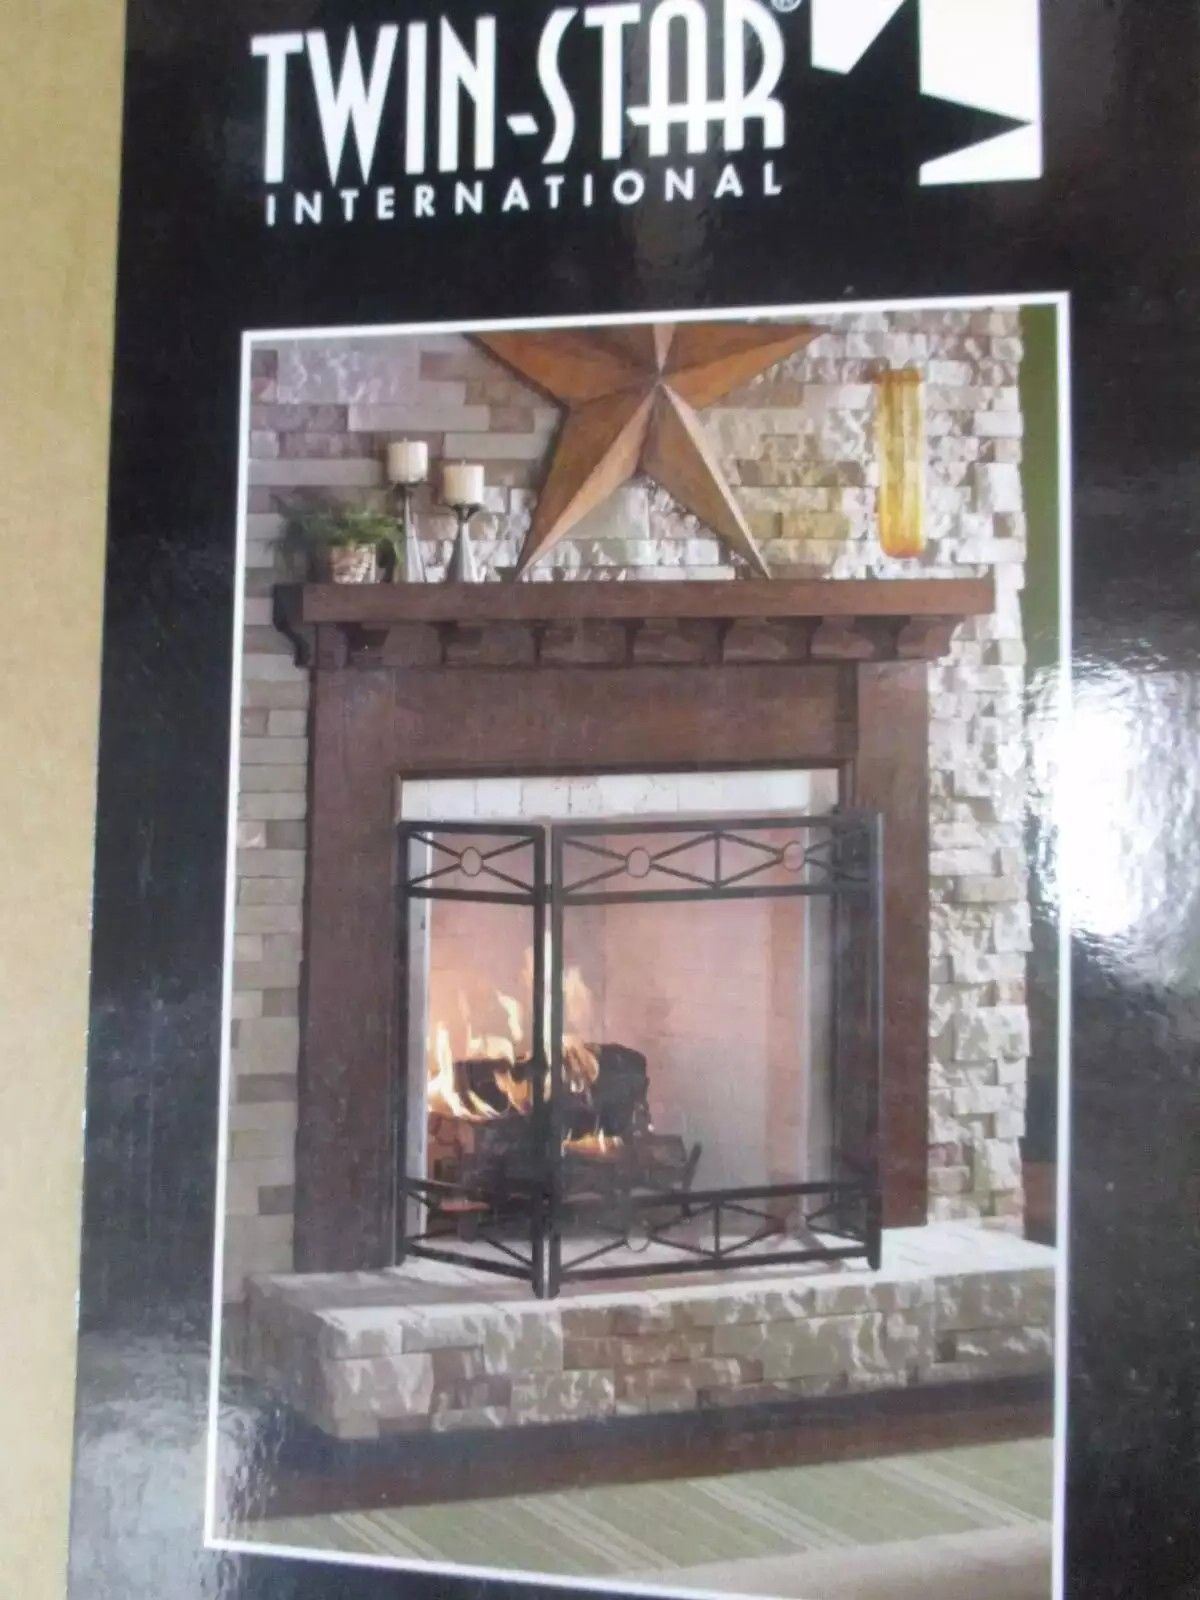 NEW TWIN STAR FIREPLACE WOOD SURROUND KIT IN MIDNIGHT CHERRY FINISH 